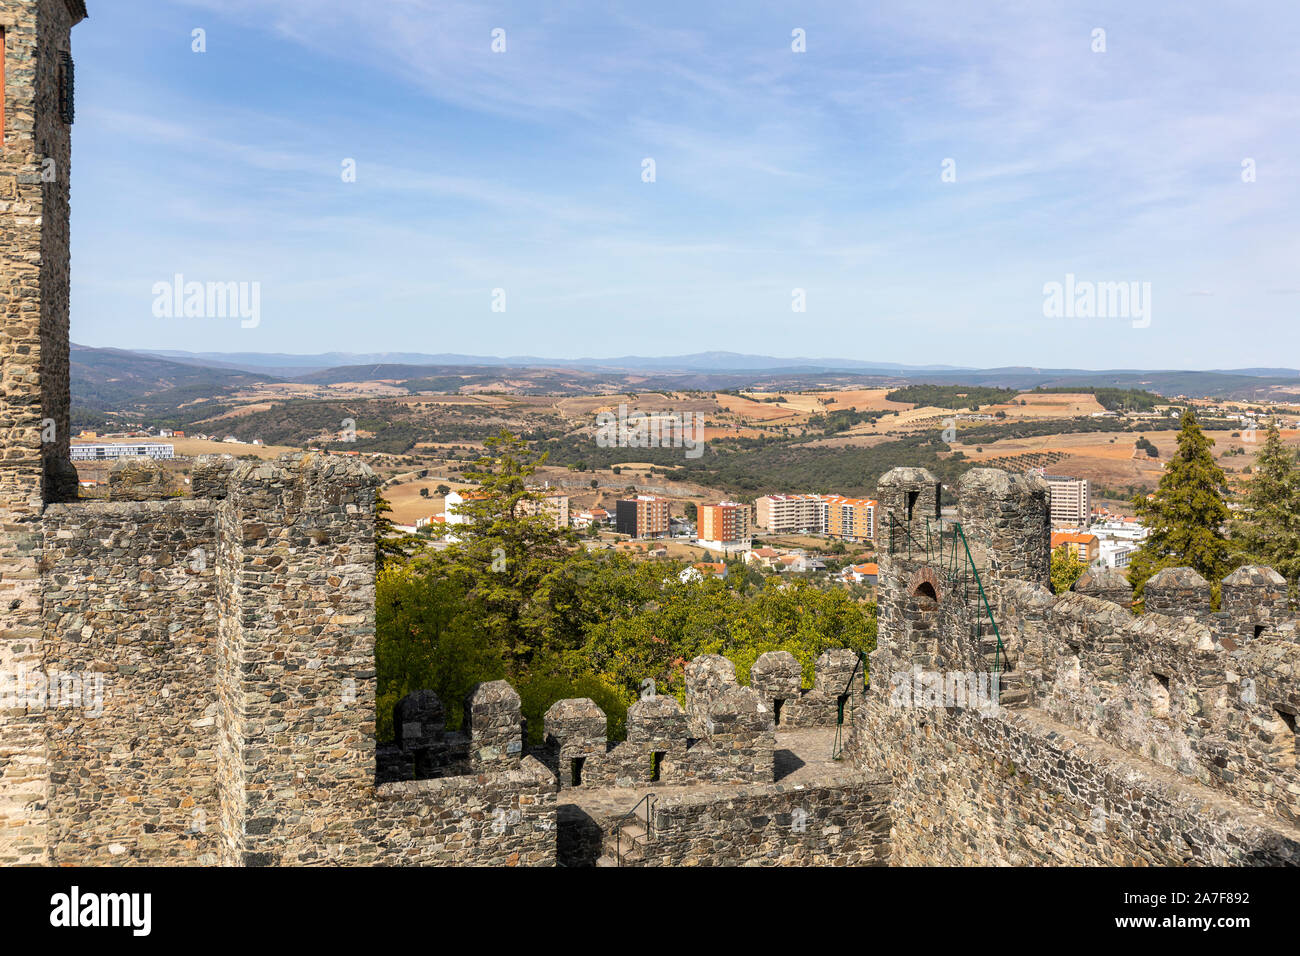 The original medieval castle built on the highest point at Braganca, Portugal Stock Photo